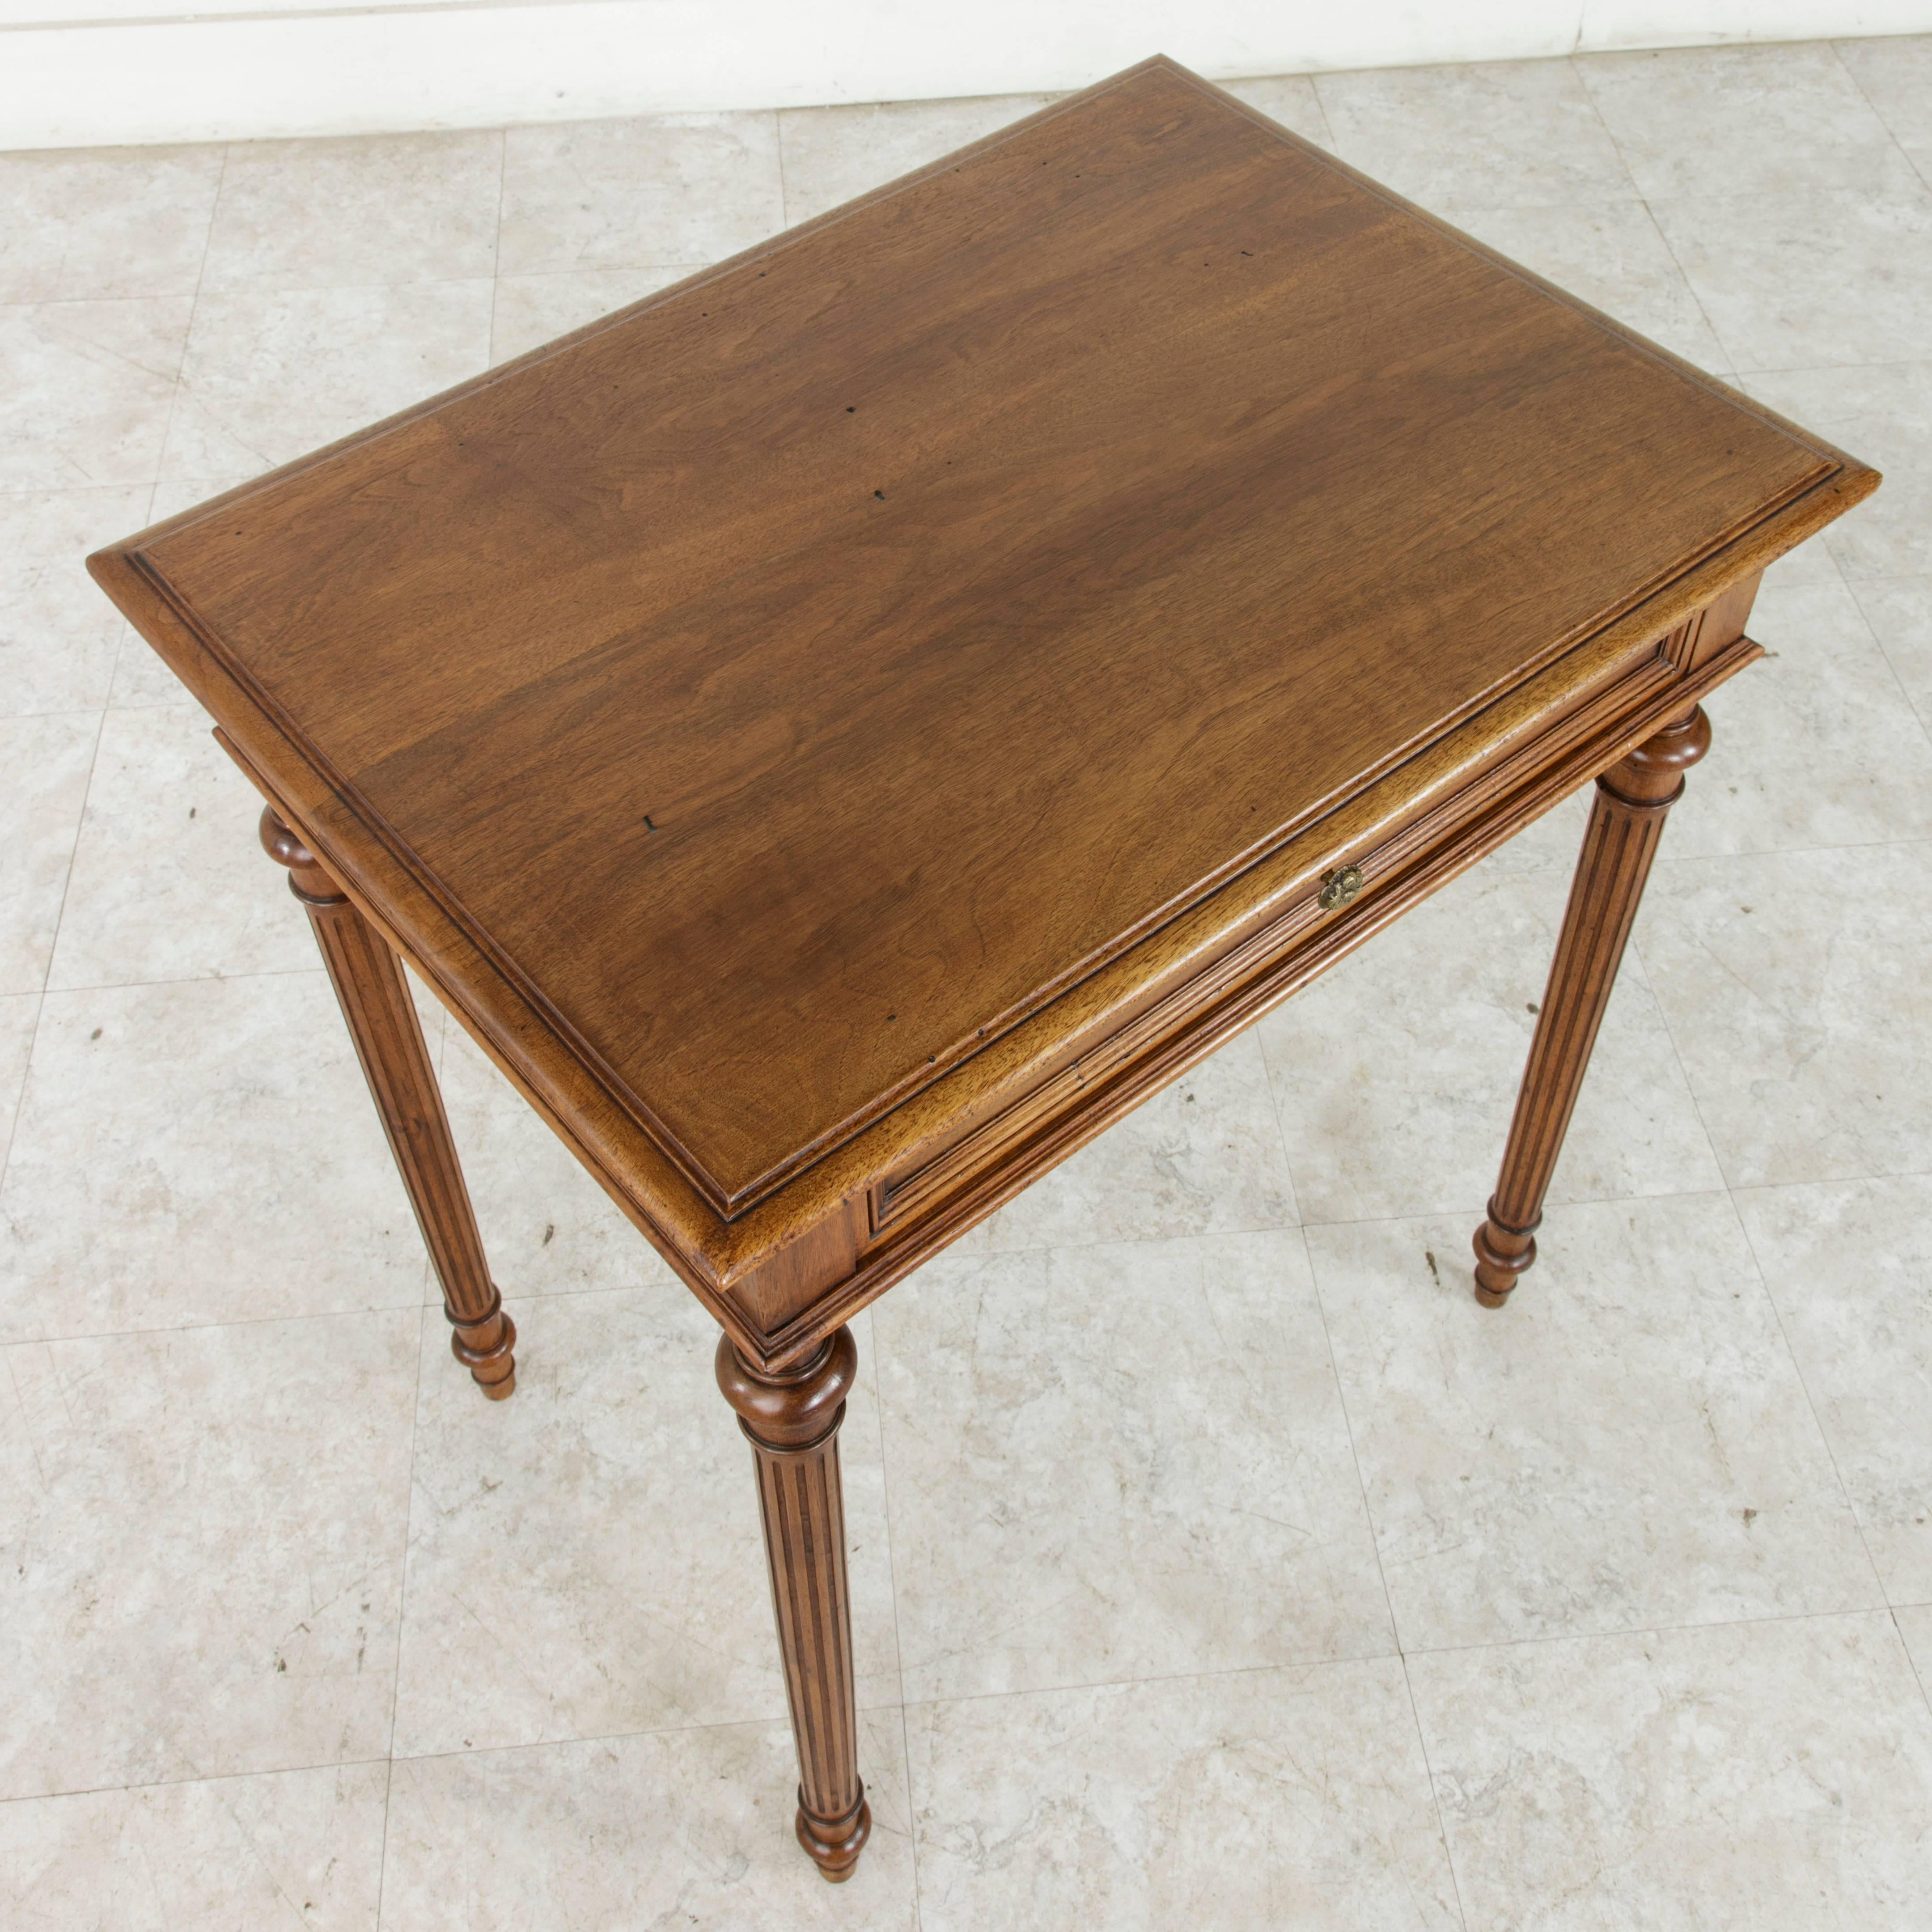 Small-Scale French Louis XVI Style Walnut Side Table or End Table with Drawer 1